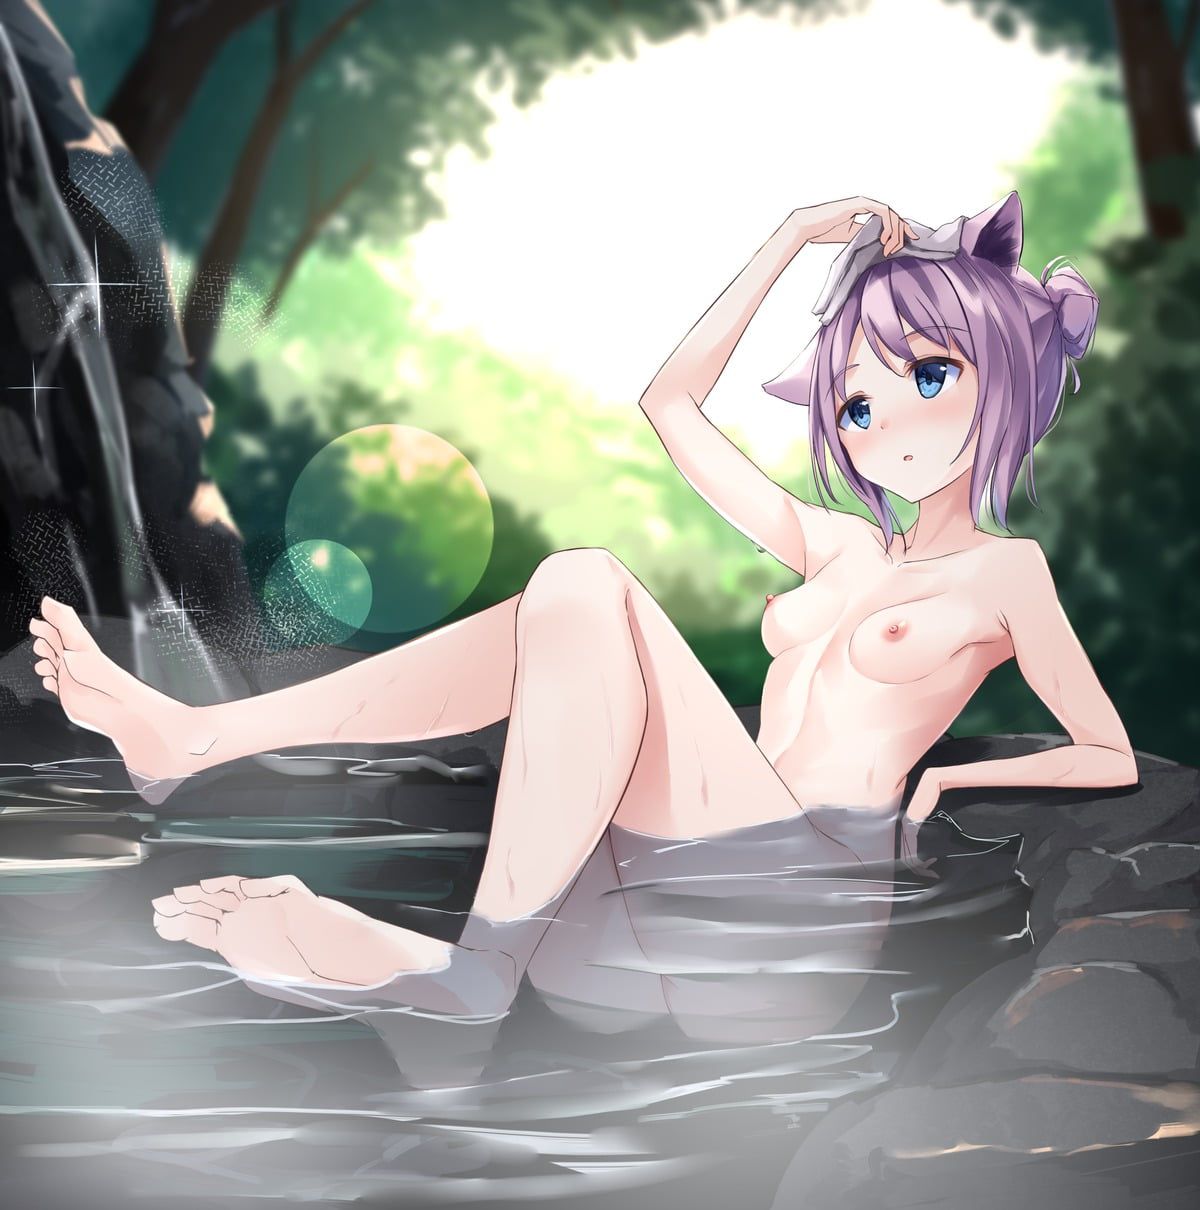 It's a bath, so it's natural to relax naked! It's not ecchi! 15